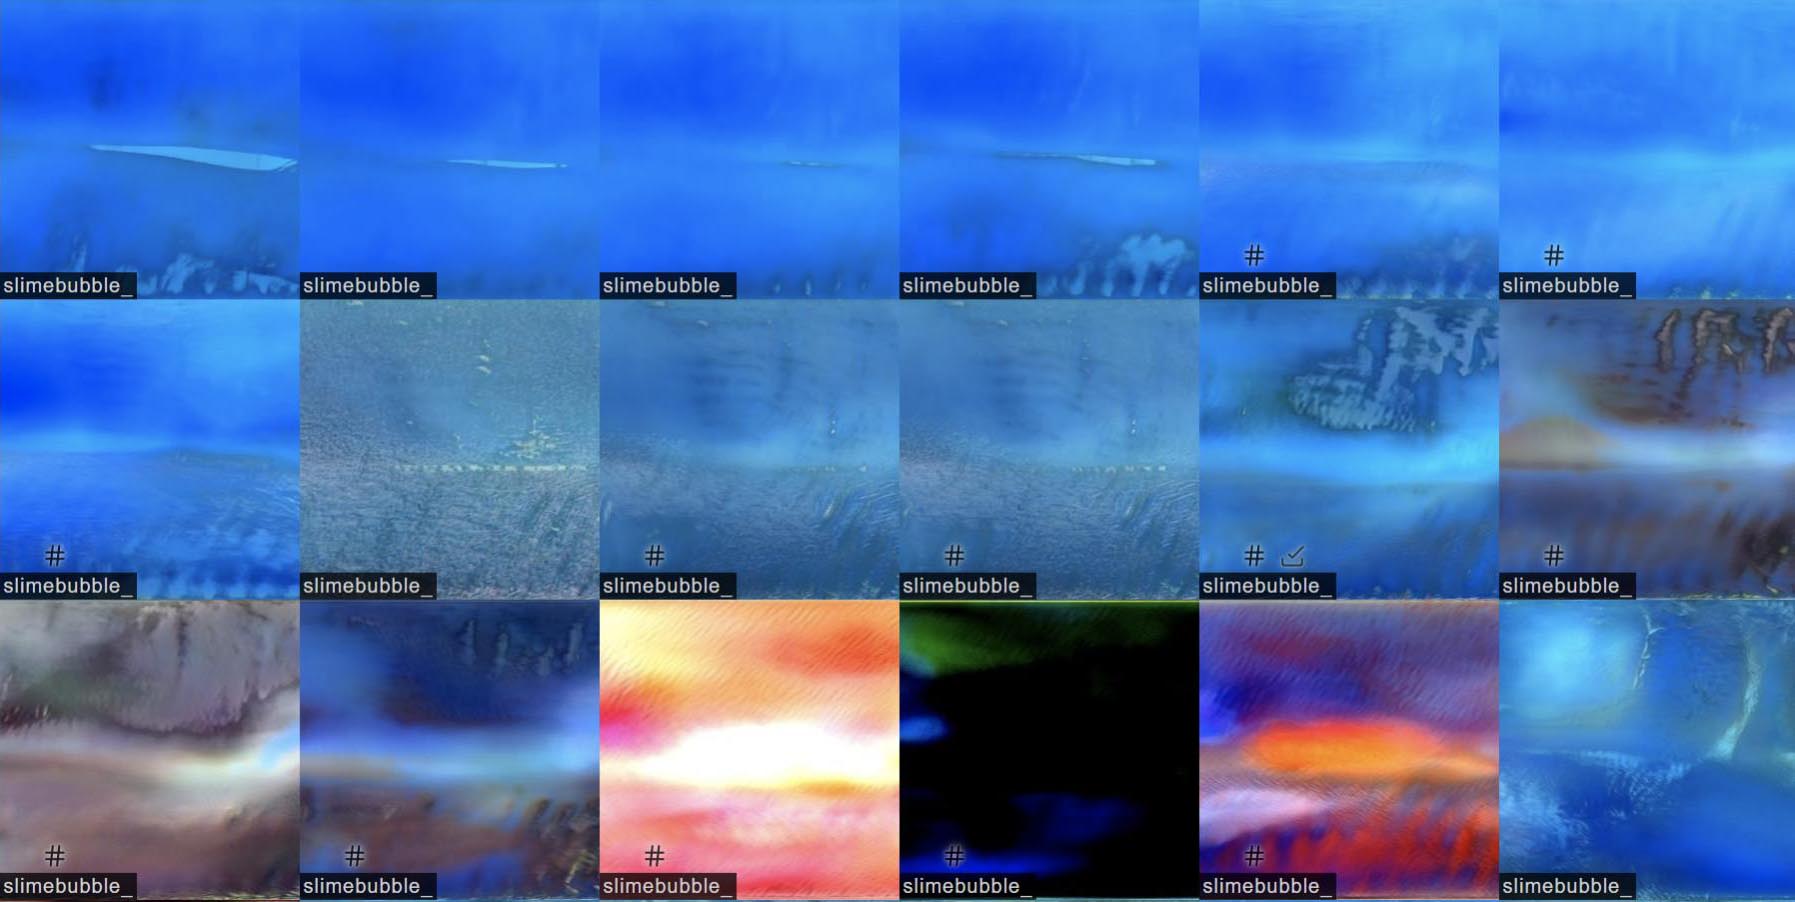 Eighteen abstract images in a grid pattern, most ocean blue, some a thermal red and yellow, and some with darker, blotted imagery, each accompanies by the text “slimebubble”